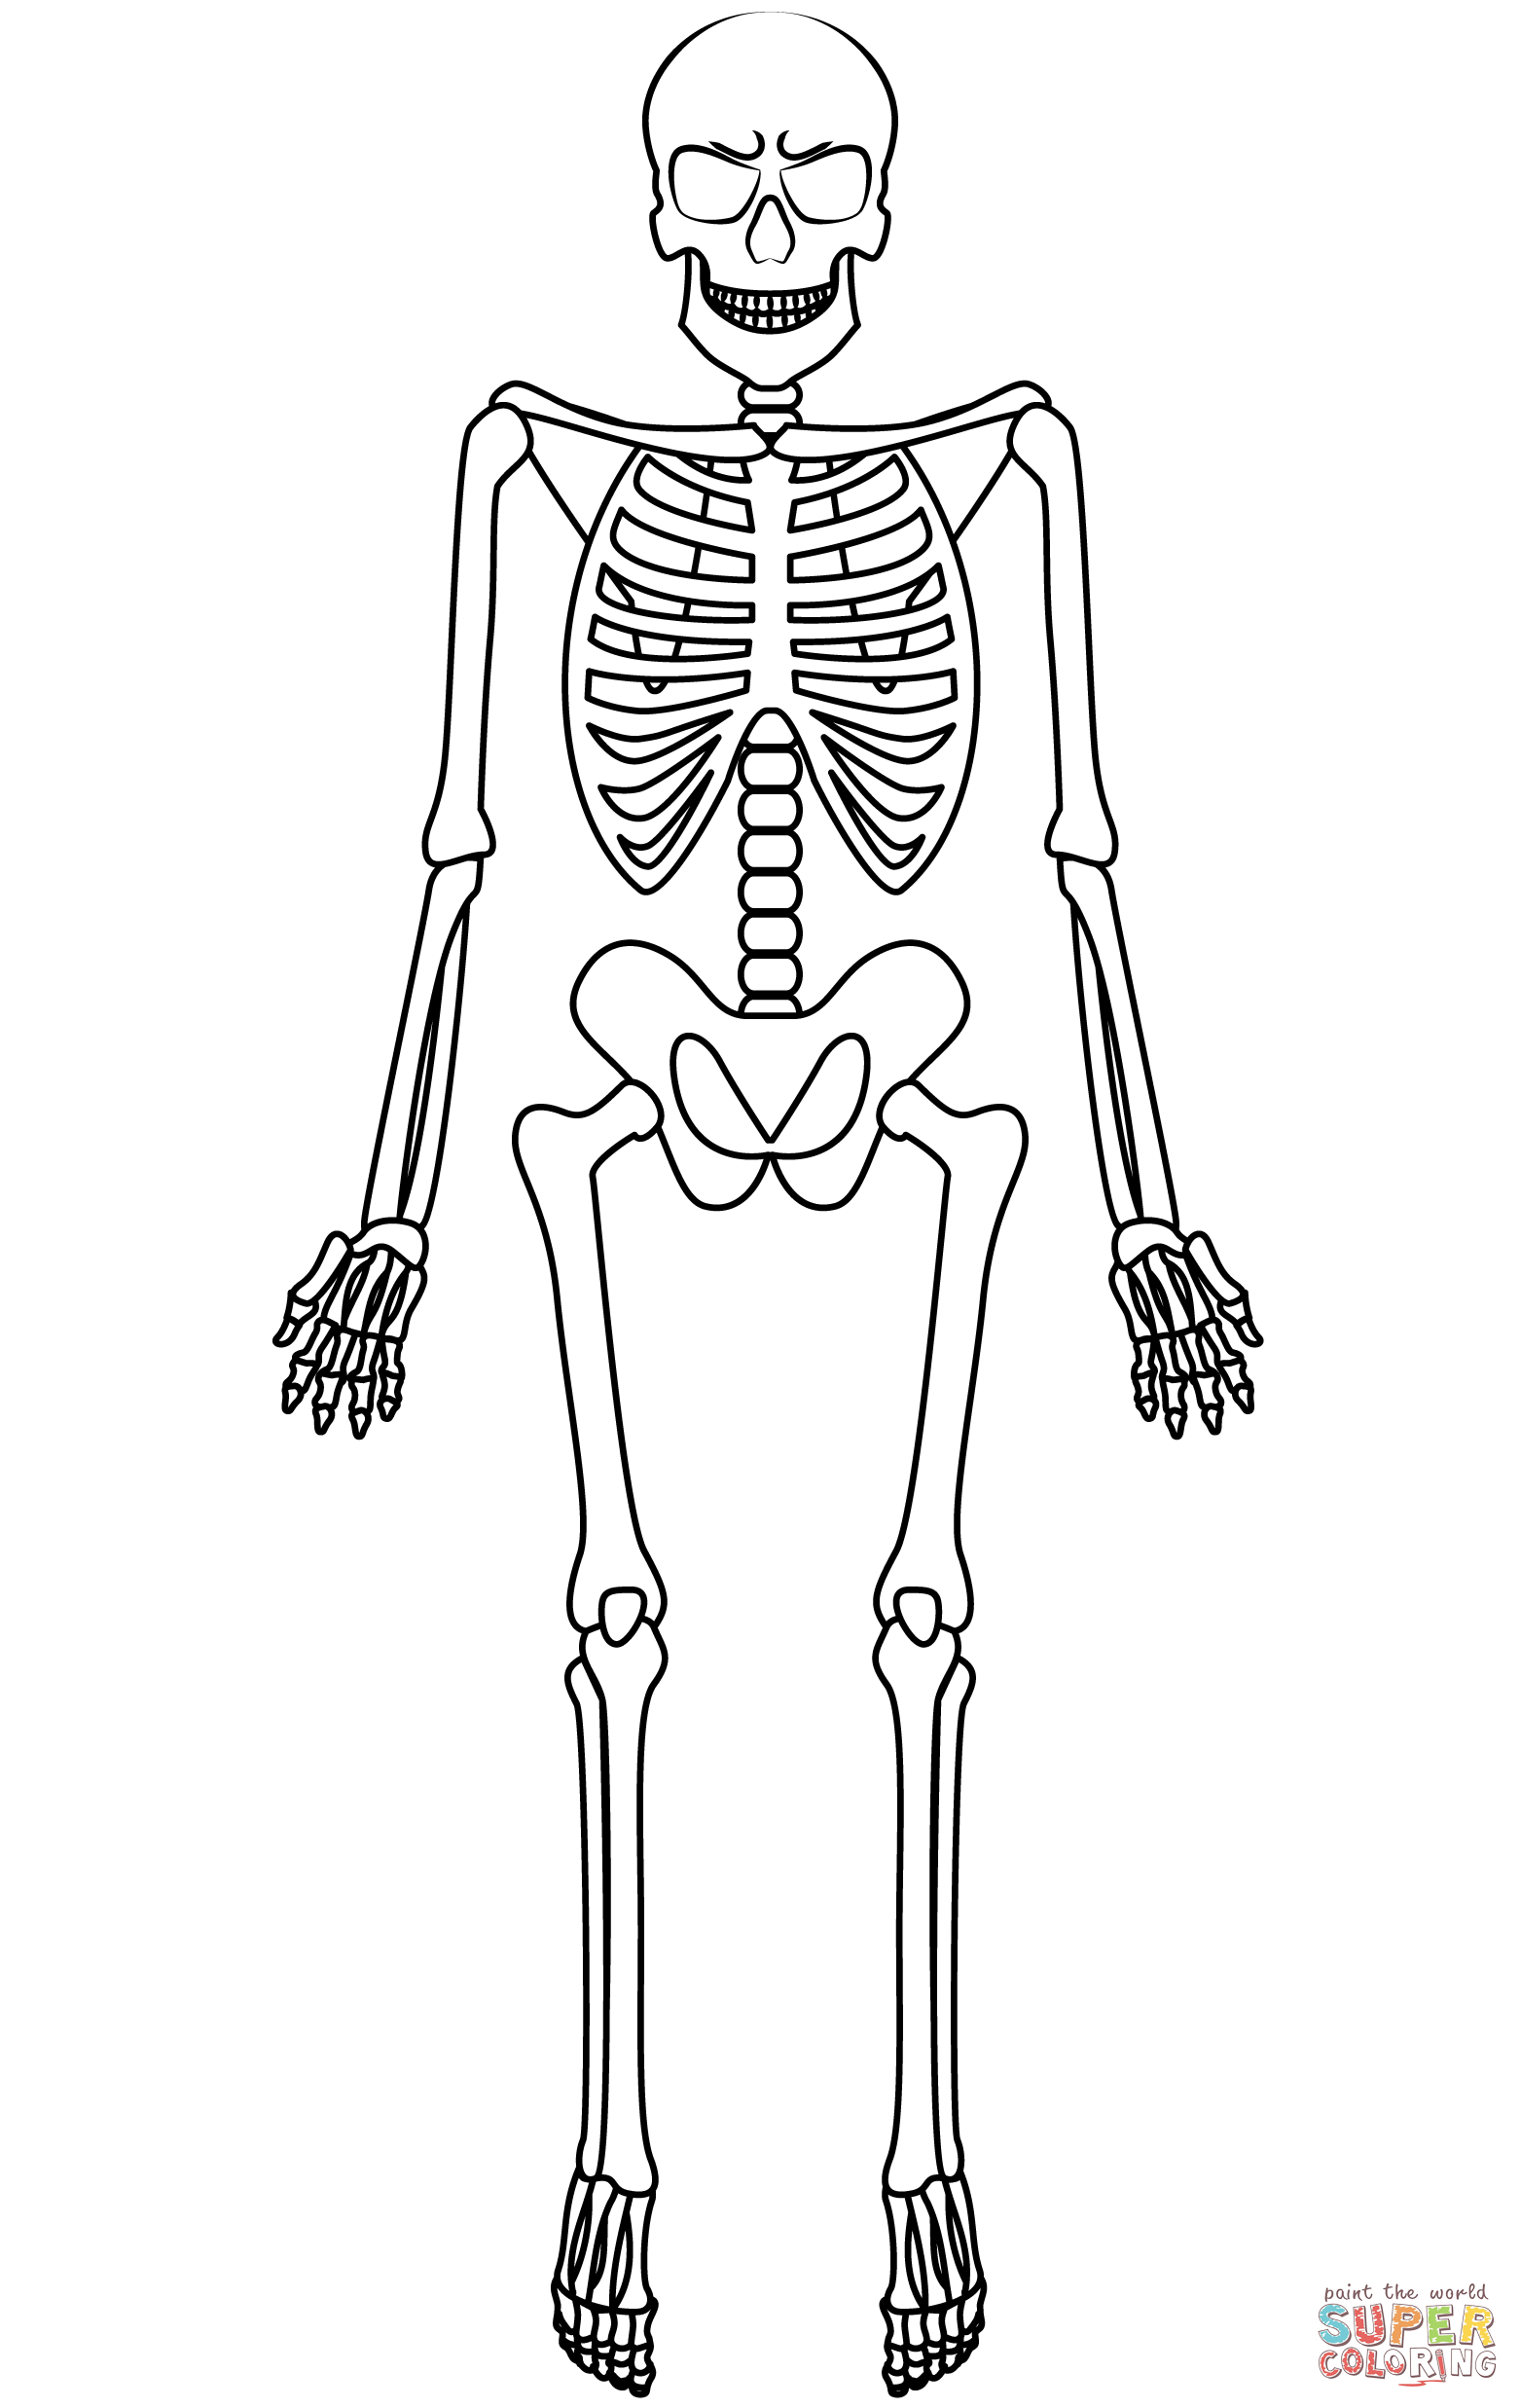 Skeleton coloring page free printable coloring pages